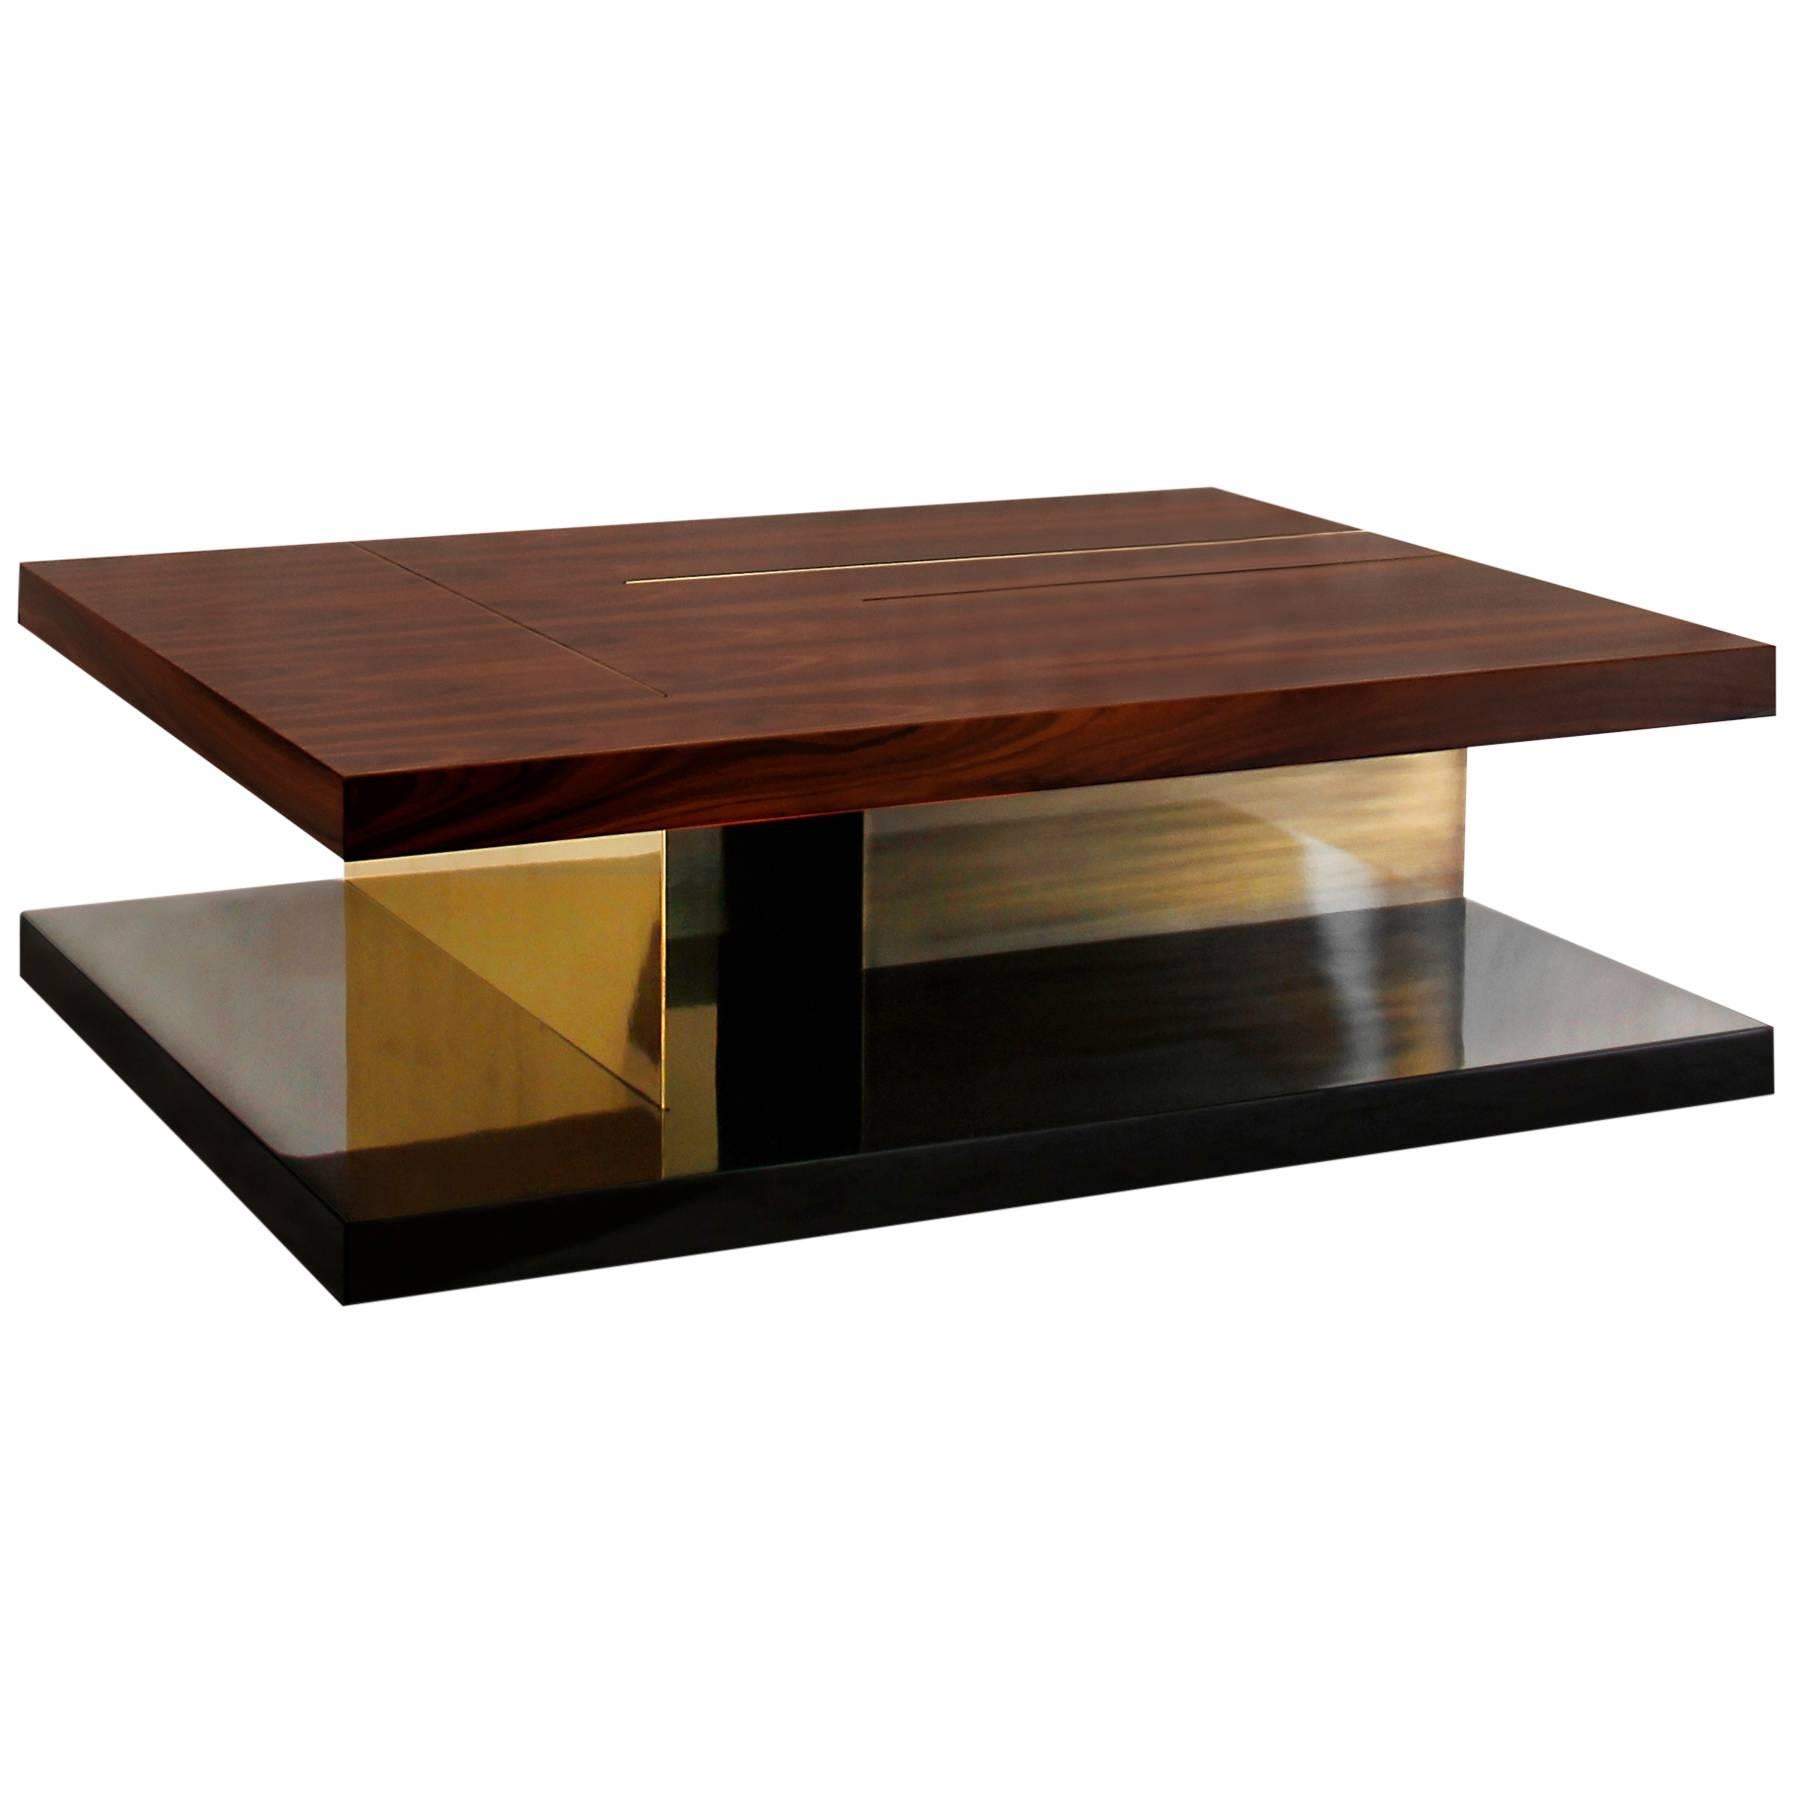 Chloe Coffee Table with High Glossy Lacquer, Veneer Wood and Brass